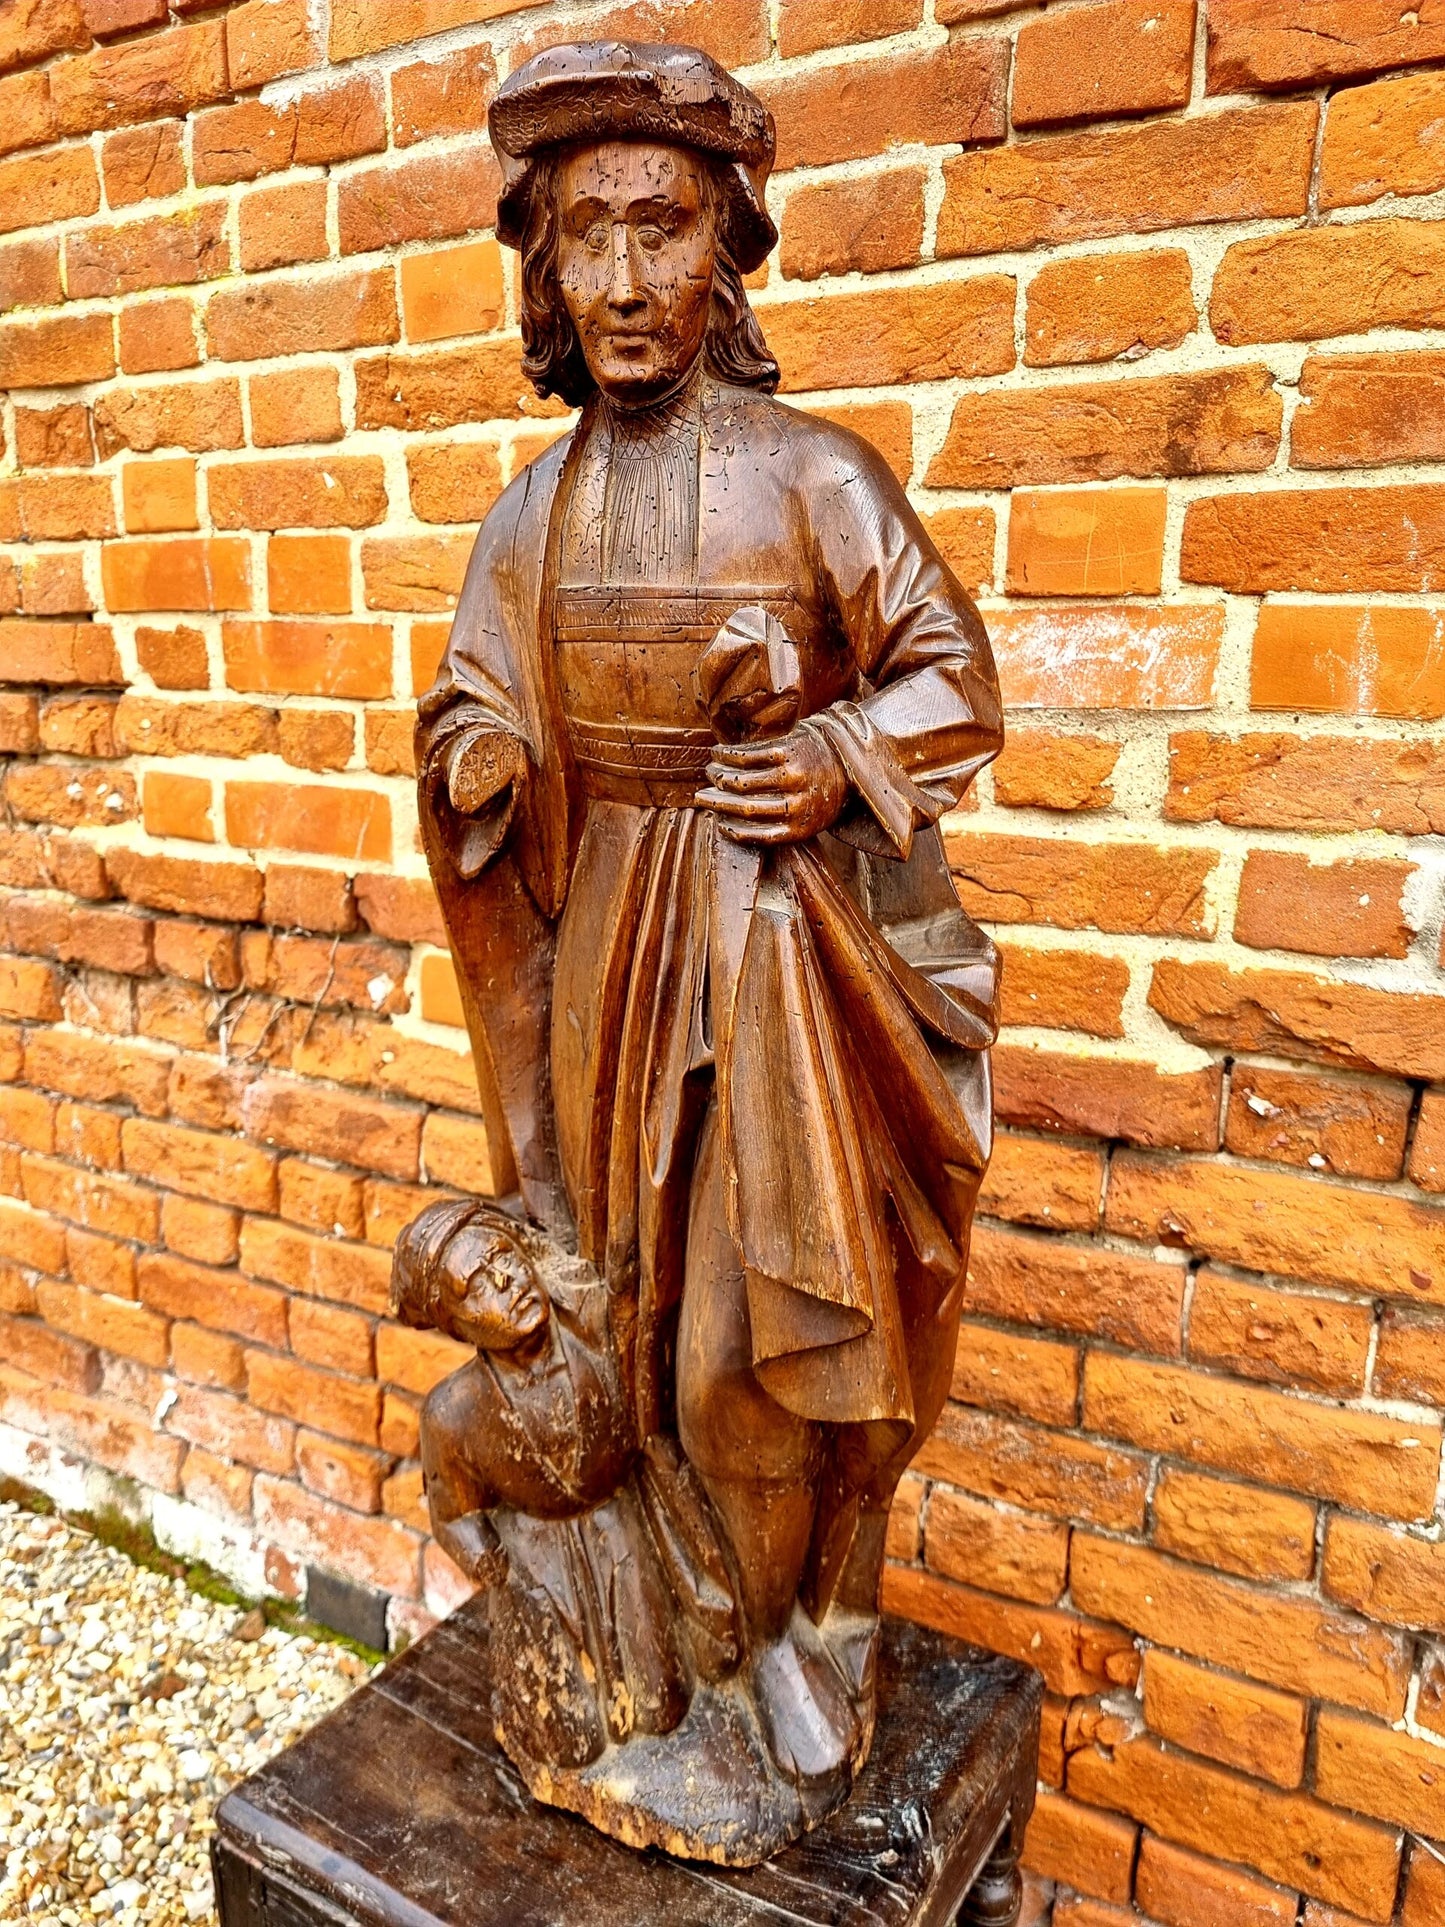 Large & Impressive Late 15th Century French Antique Carved Wood Sculpture of Saint Martin of Tours